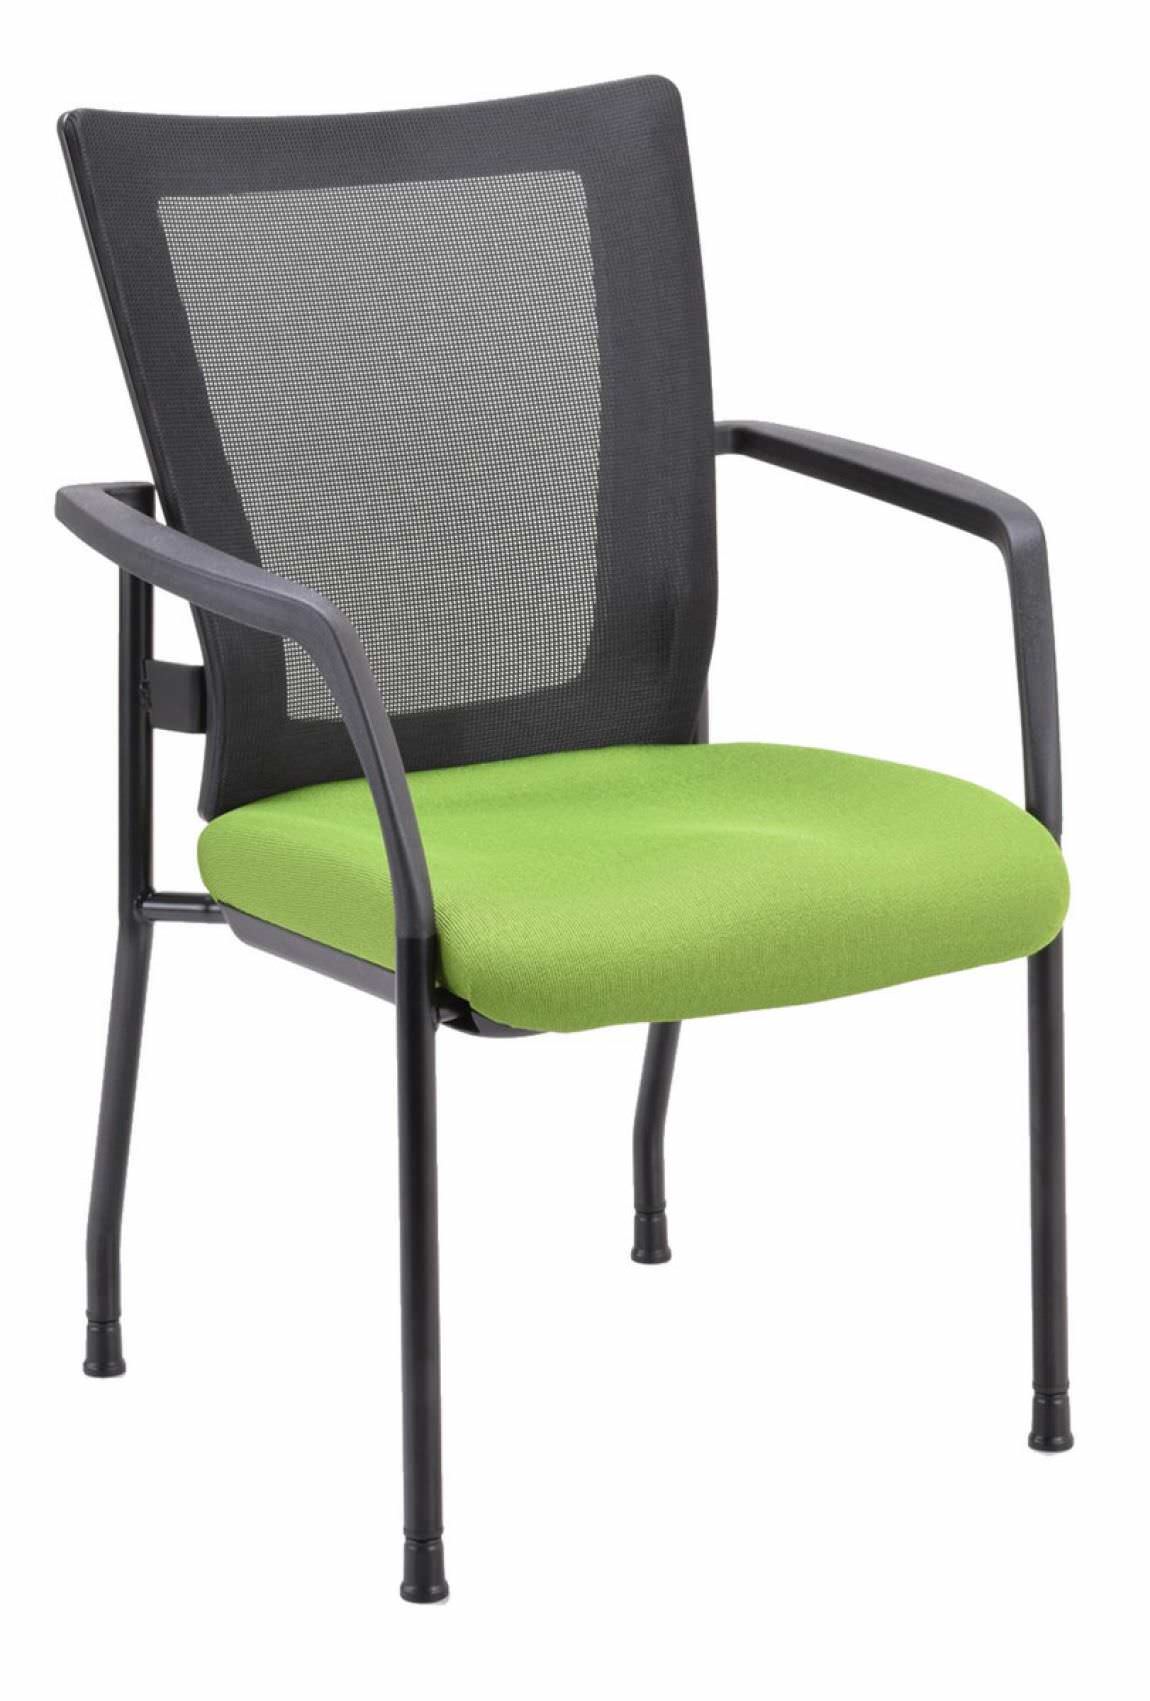 Green Stacking Chair with Mesh Back